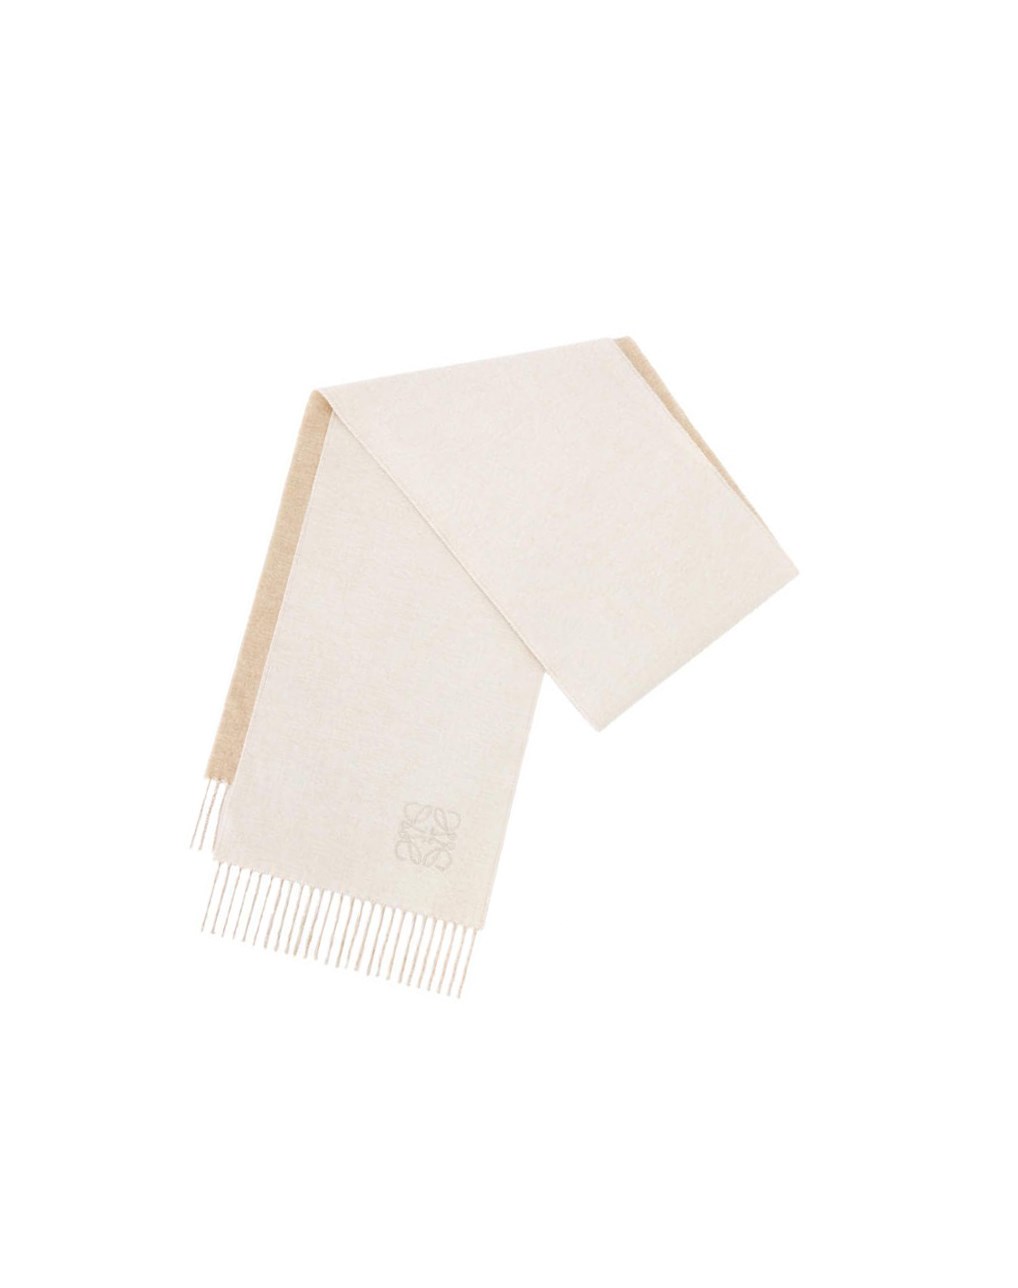 Loewe Bicolour scarf in wool and cashmere Ivory / Sand | EB6892430